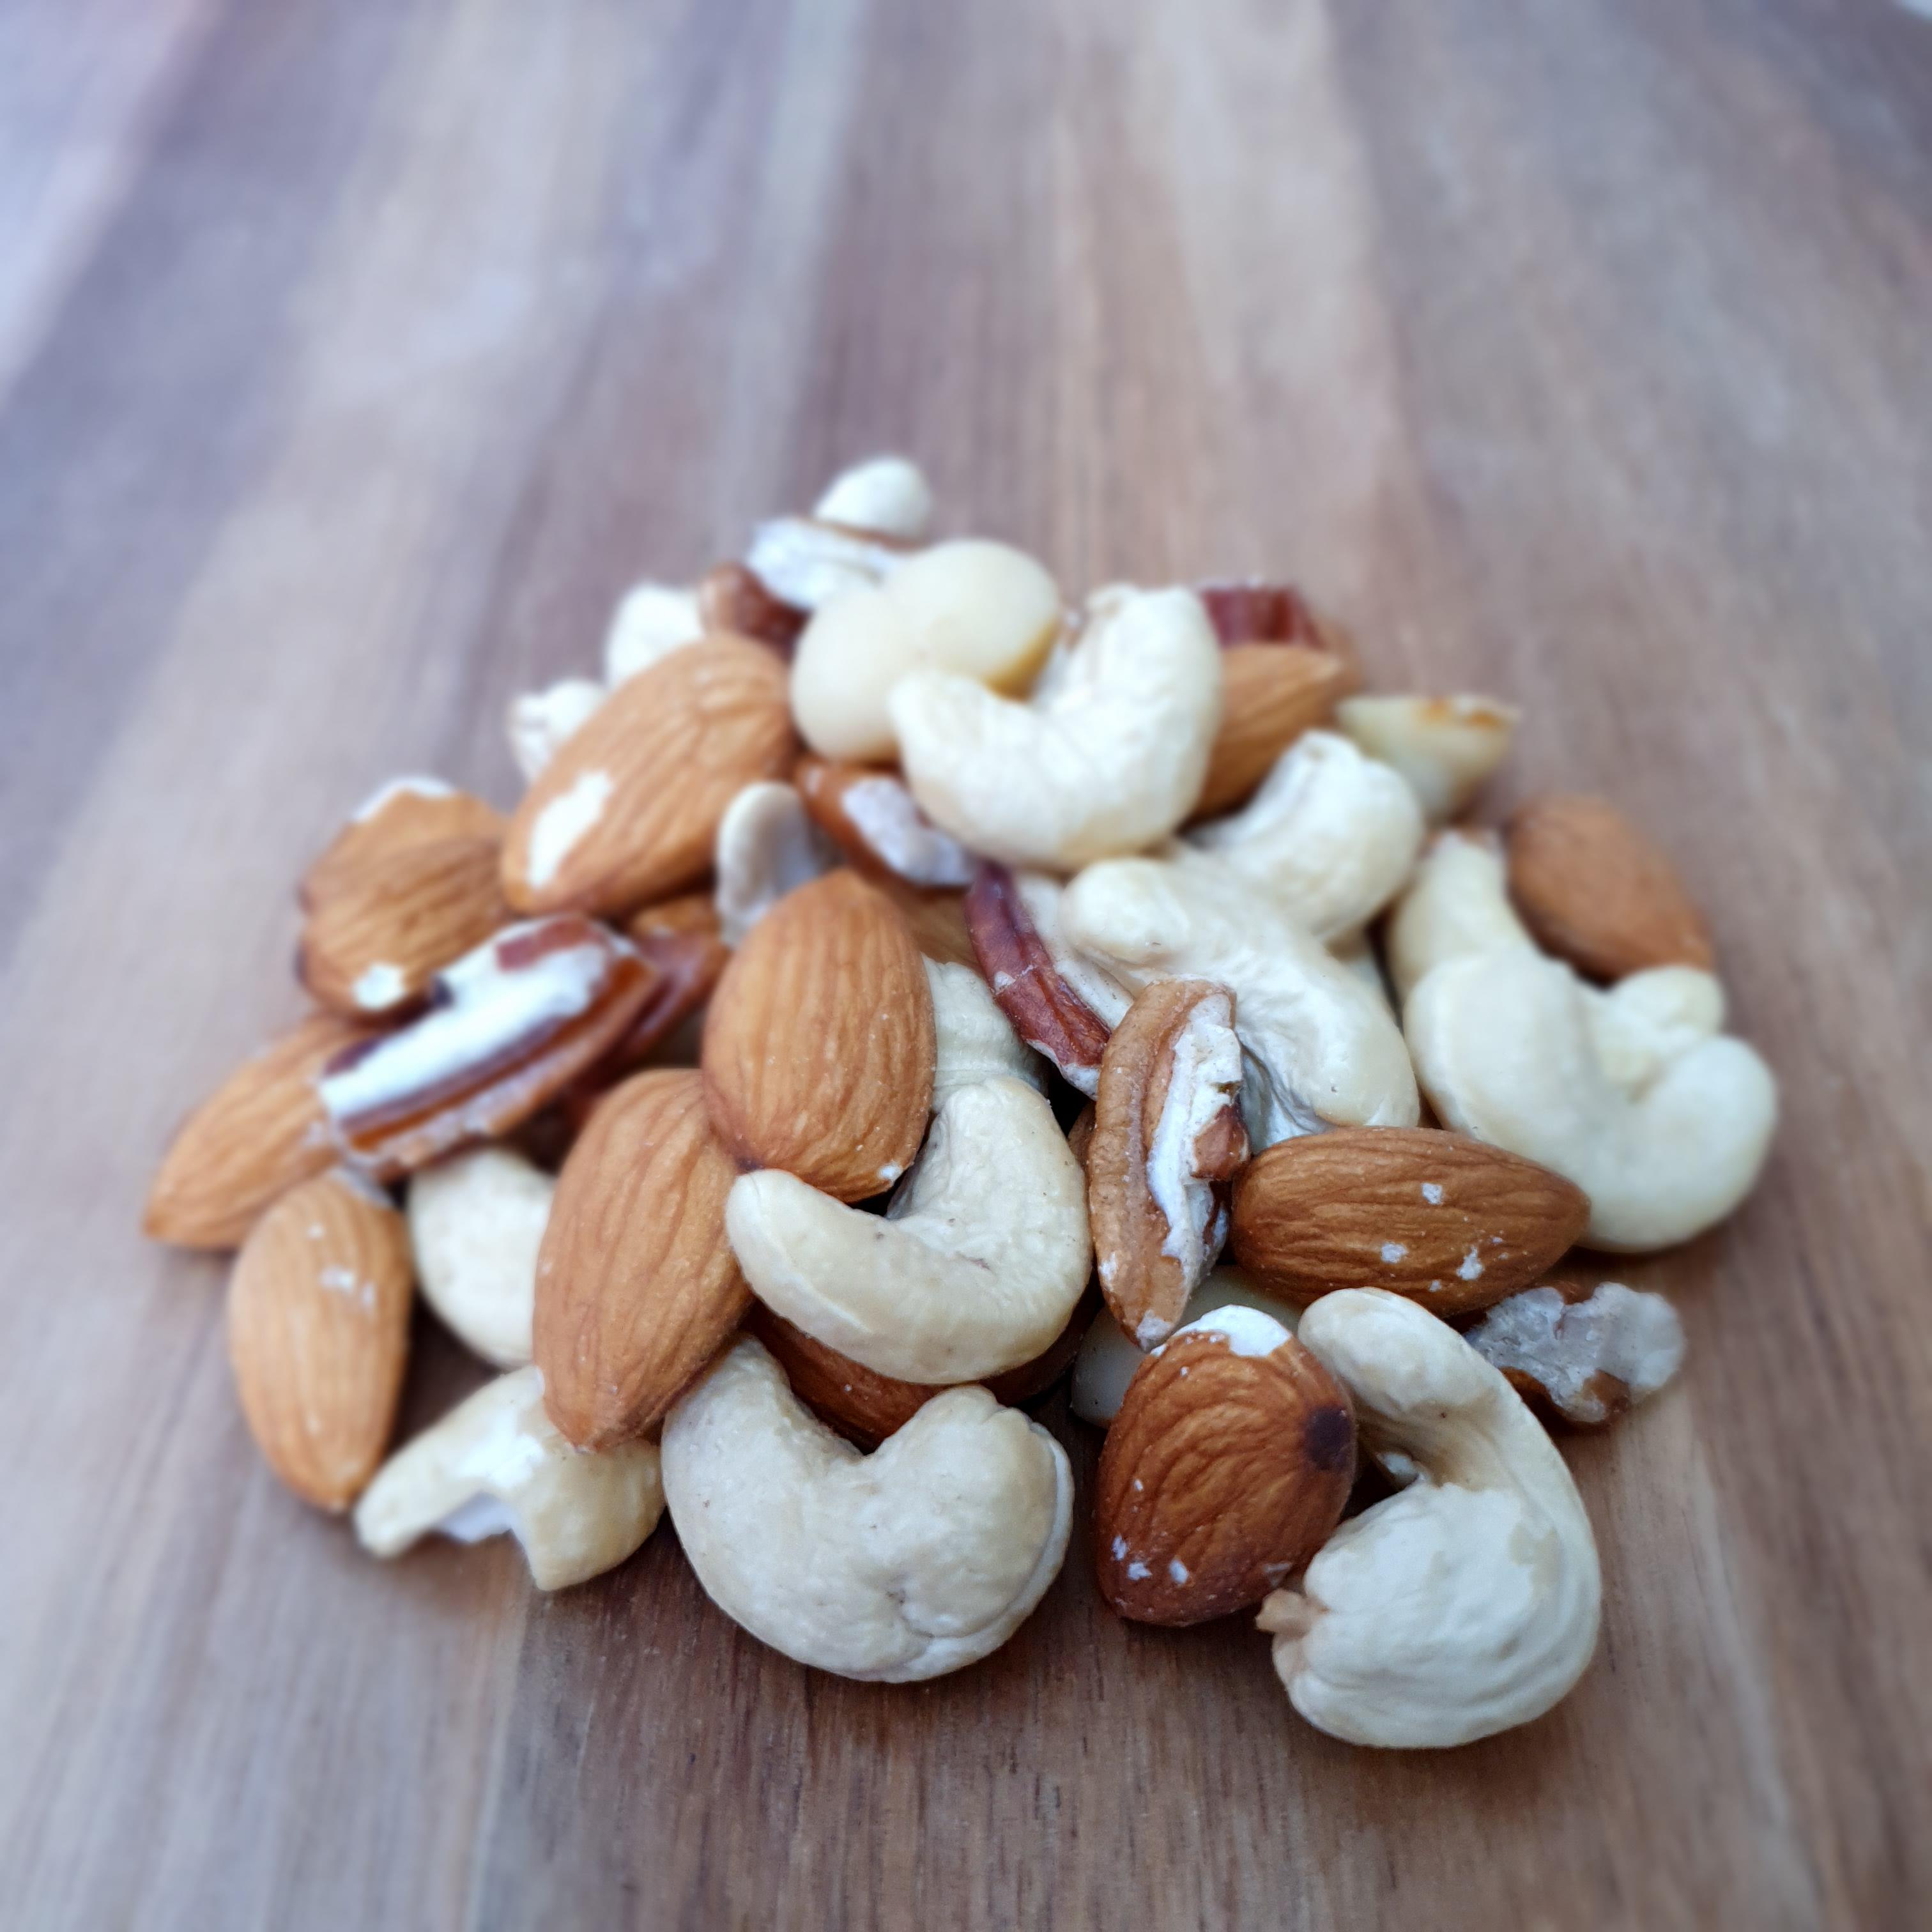 MIXED NUTS RAW 1kg